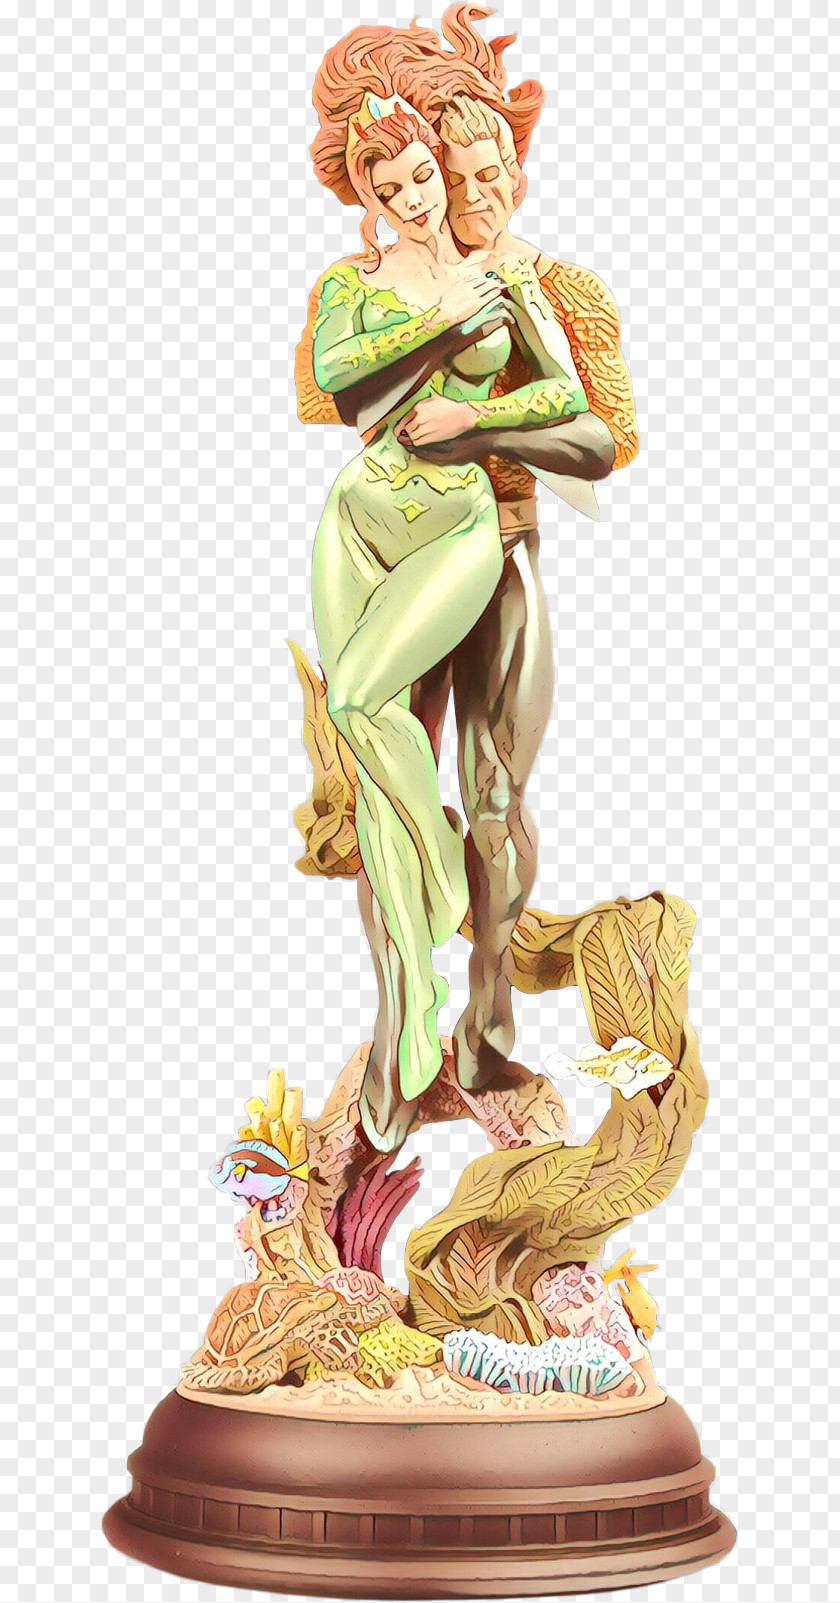 Fashion Illustration Costume Design Statue Arm Joint Fictional Character Human Body PNG